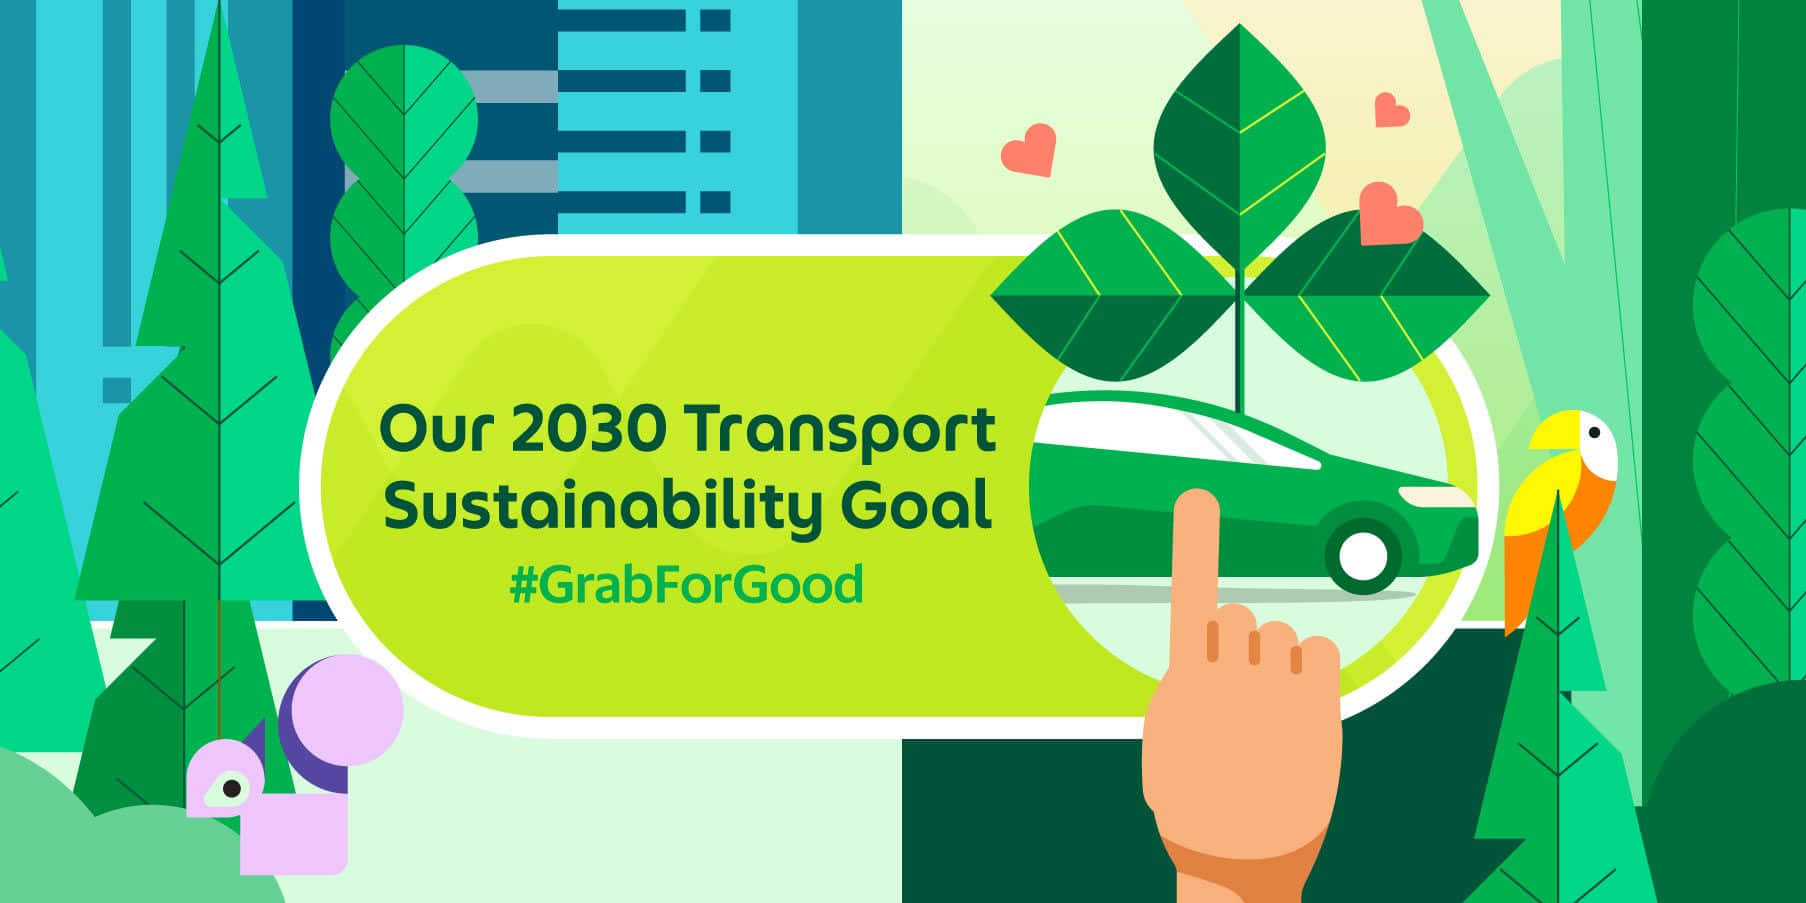 Grab Singapore announces transport sustainability goal as part of its